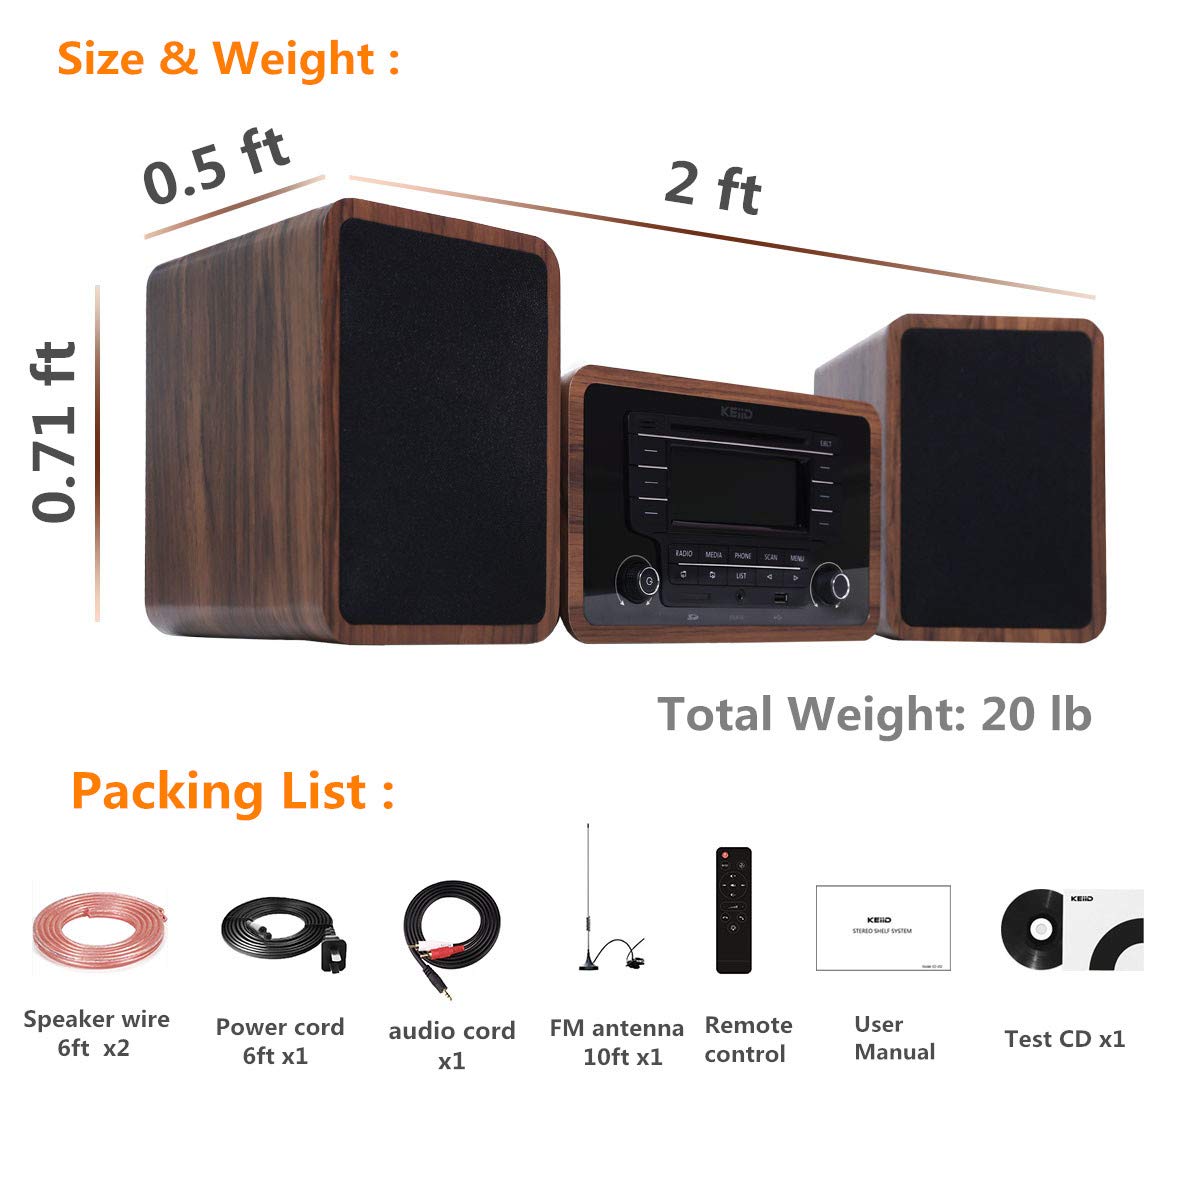 KEiiD Stereo Shelf System Powered with Bookshelf Speakers RMS 2X 25W for Home Audio Entertainment with CD Player and Bluetooth / FM Radio / USB / SD / AUX,Remote Control